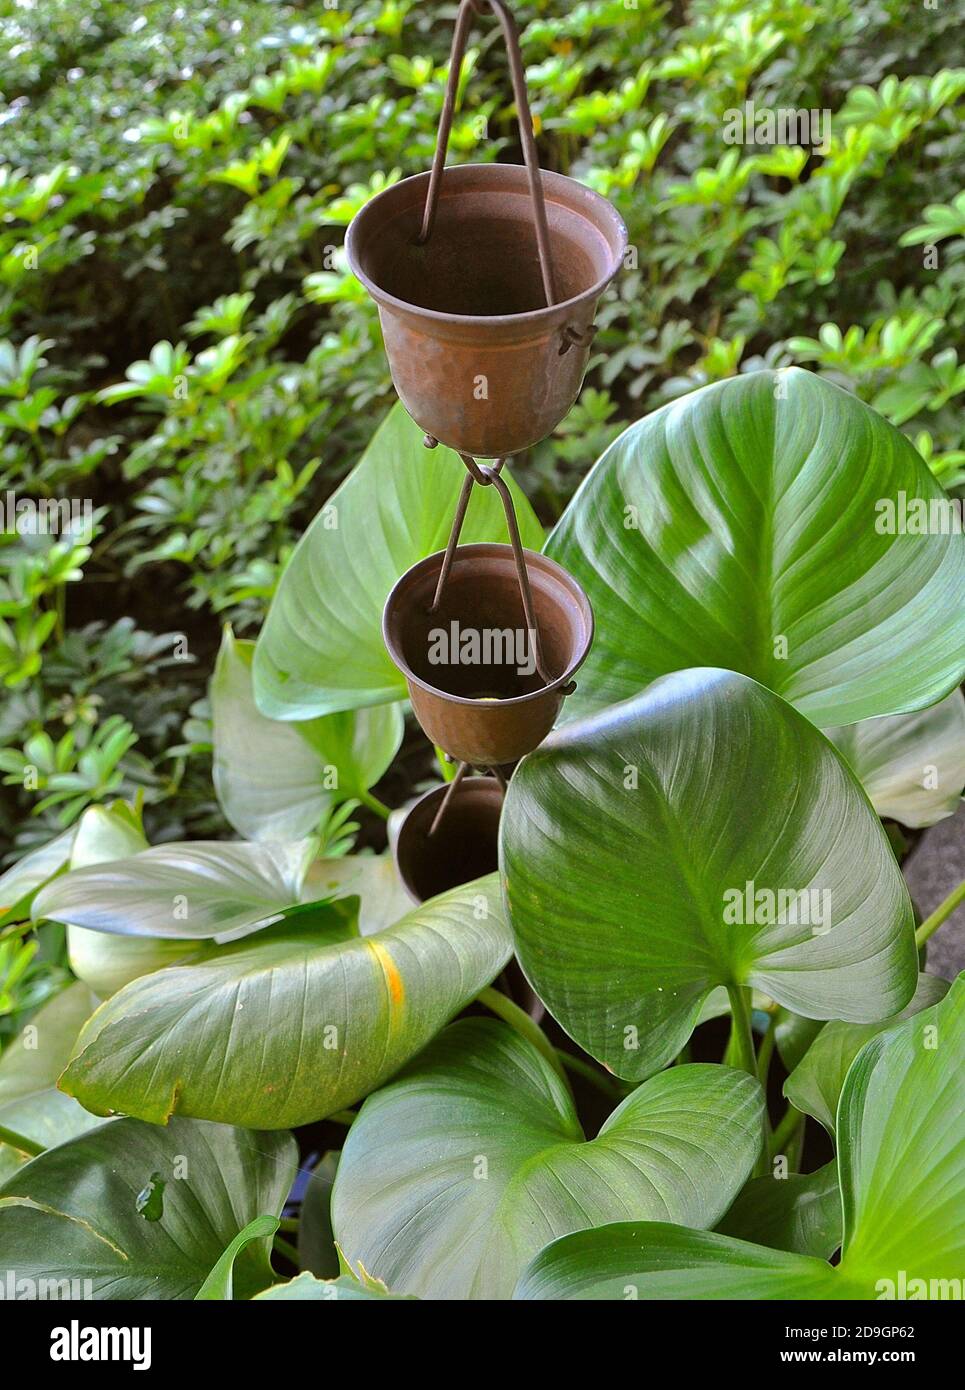 Garden feature of bronze cups which channel rainfall down the chains into the plant pots of lush greenery. Stock Photo